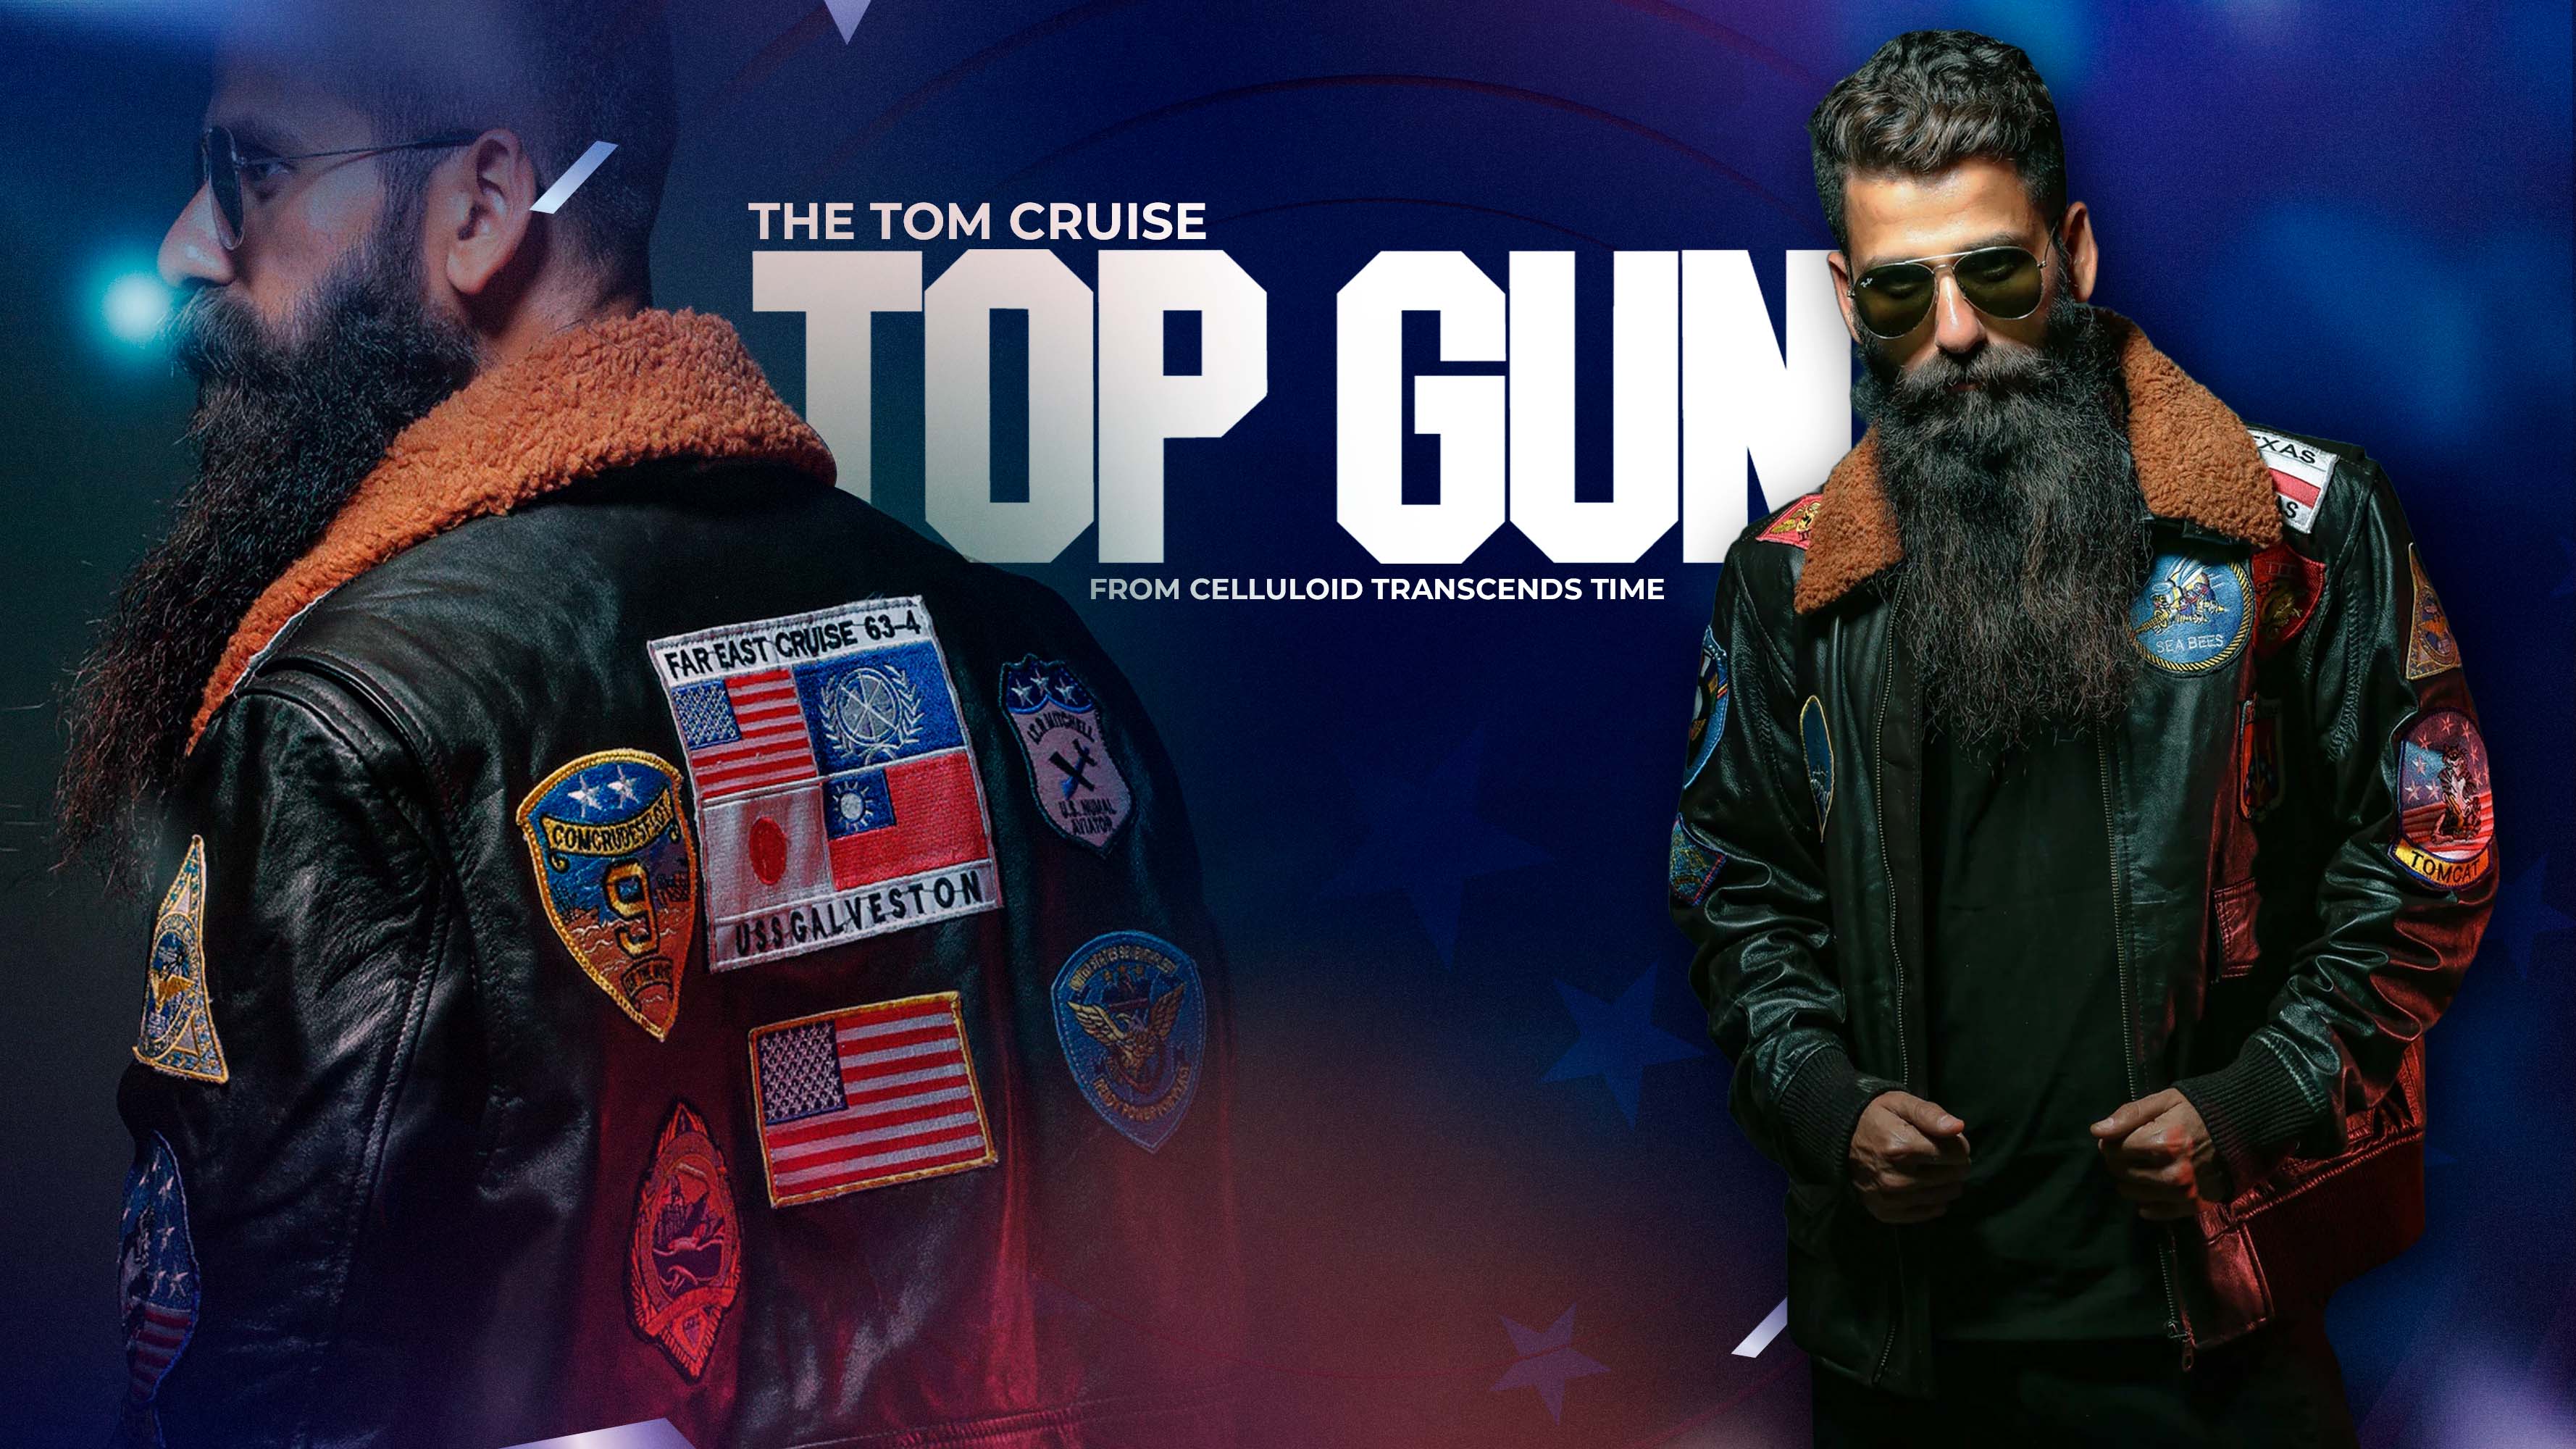 The Tom Cruise Top Gun Jacket From Celluloid Transcends Time